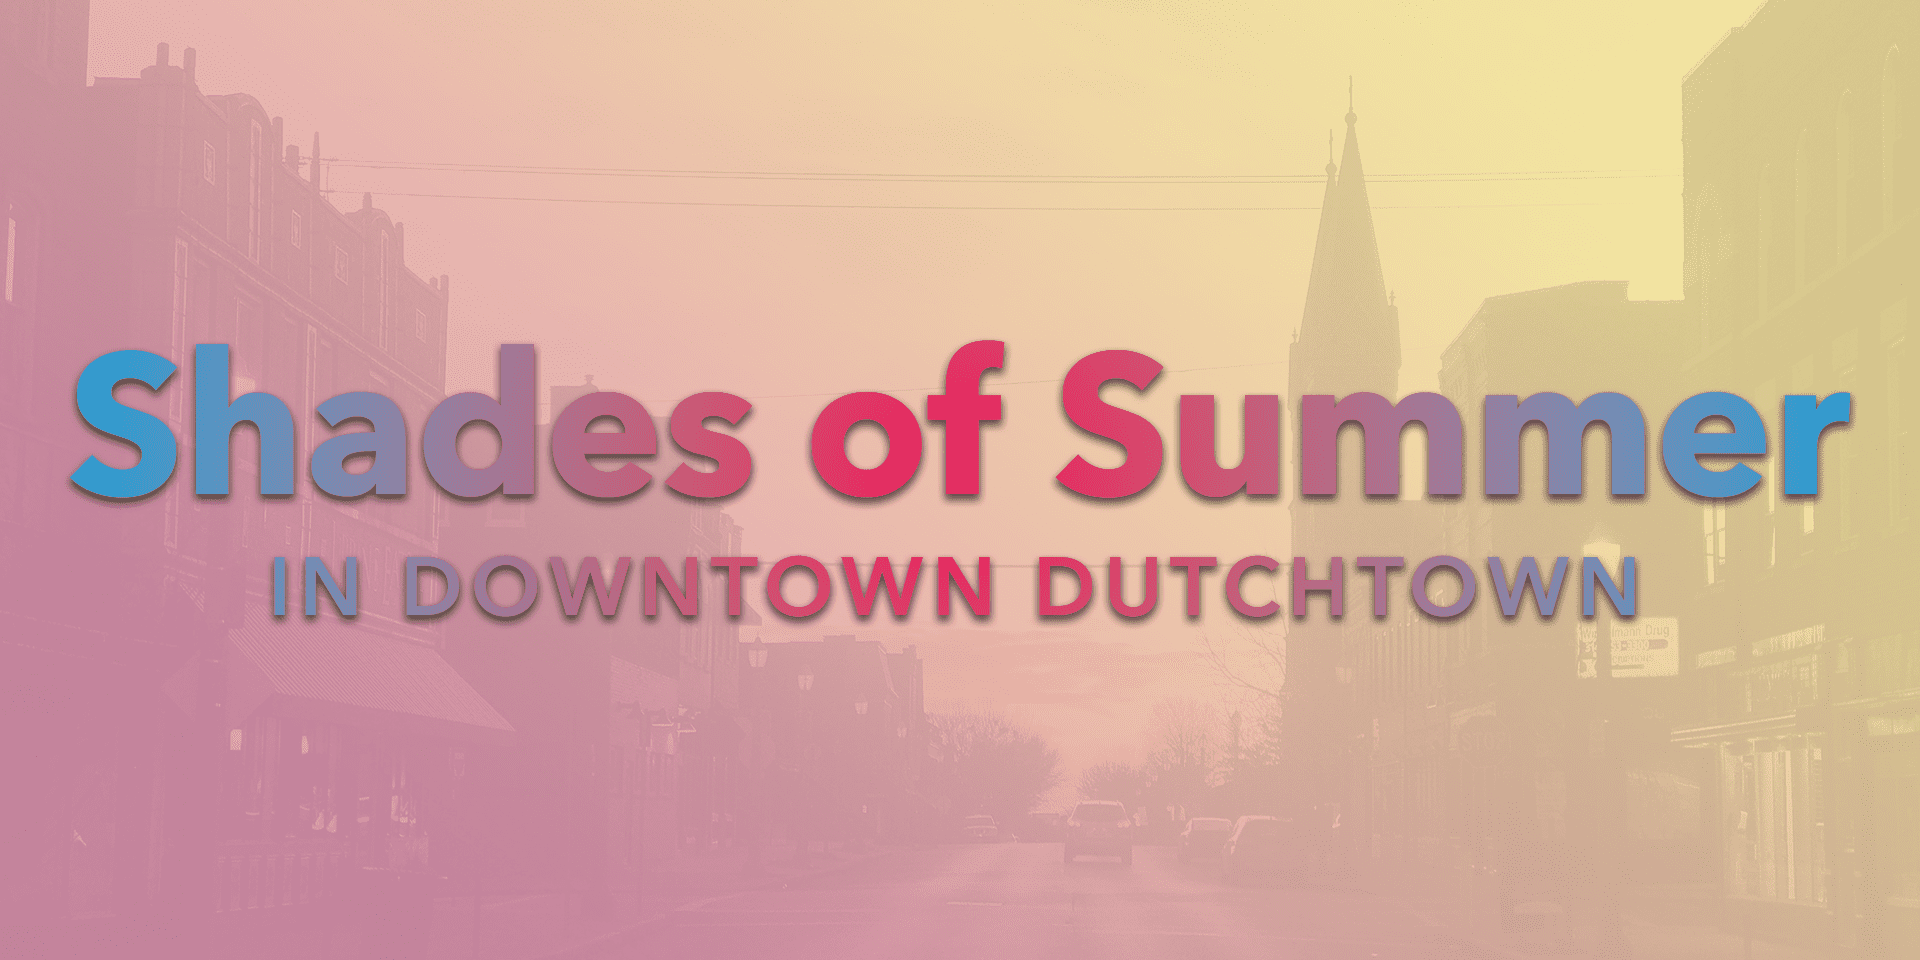 Shades of Summer in Downtown Dutchtown.